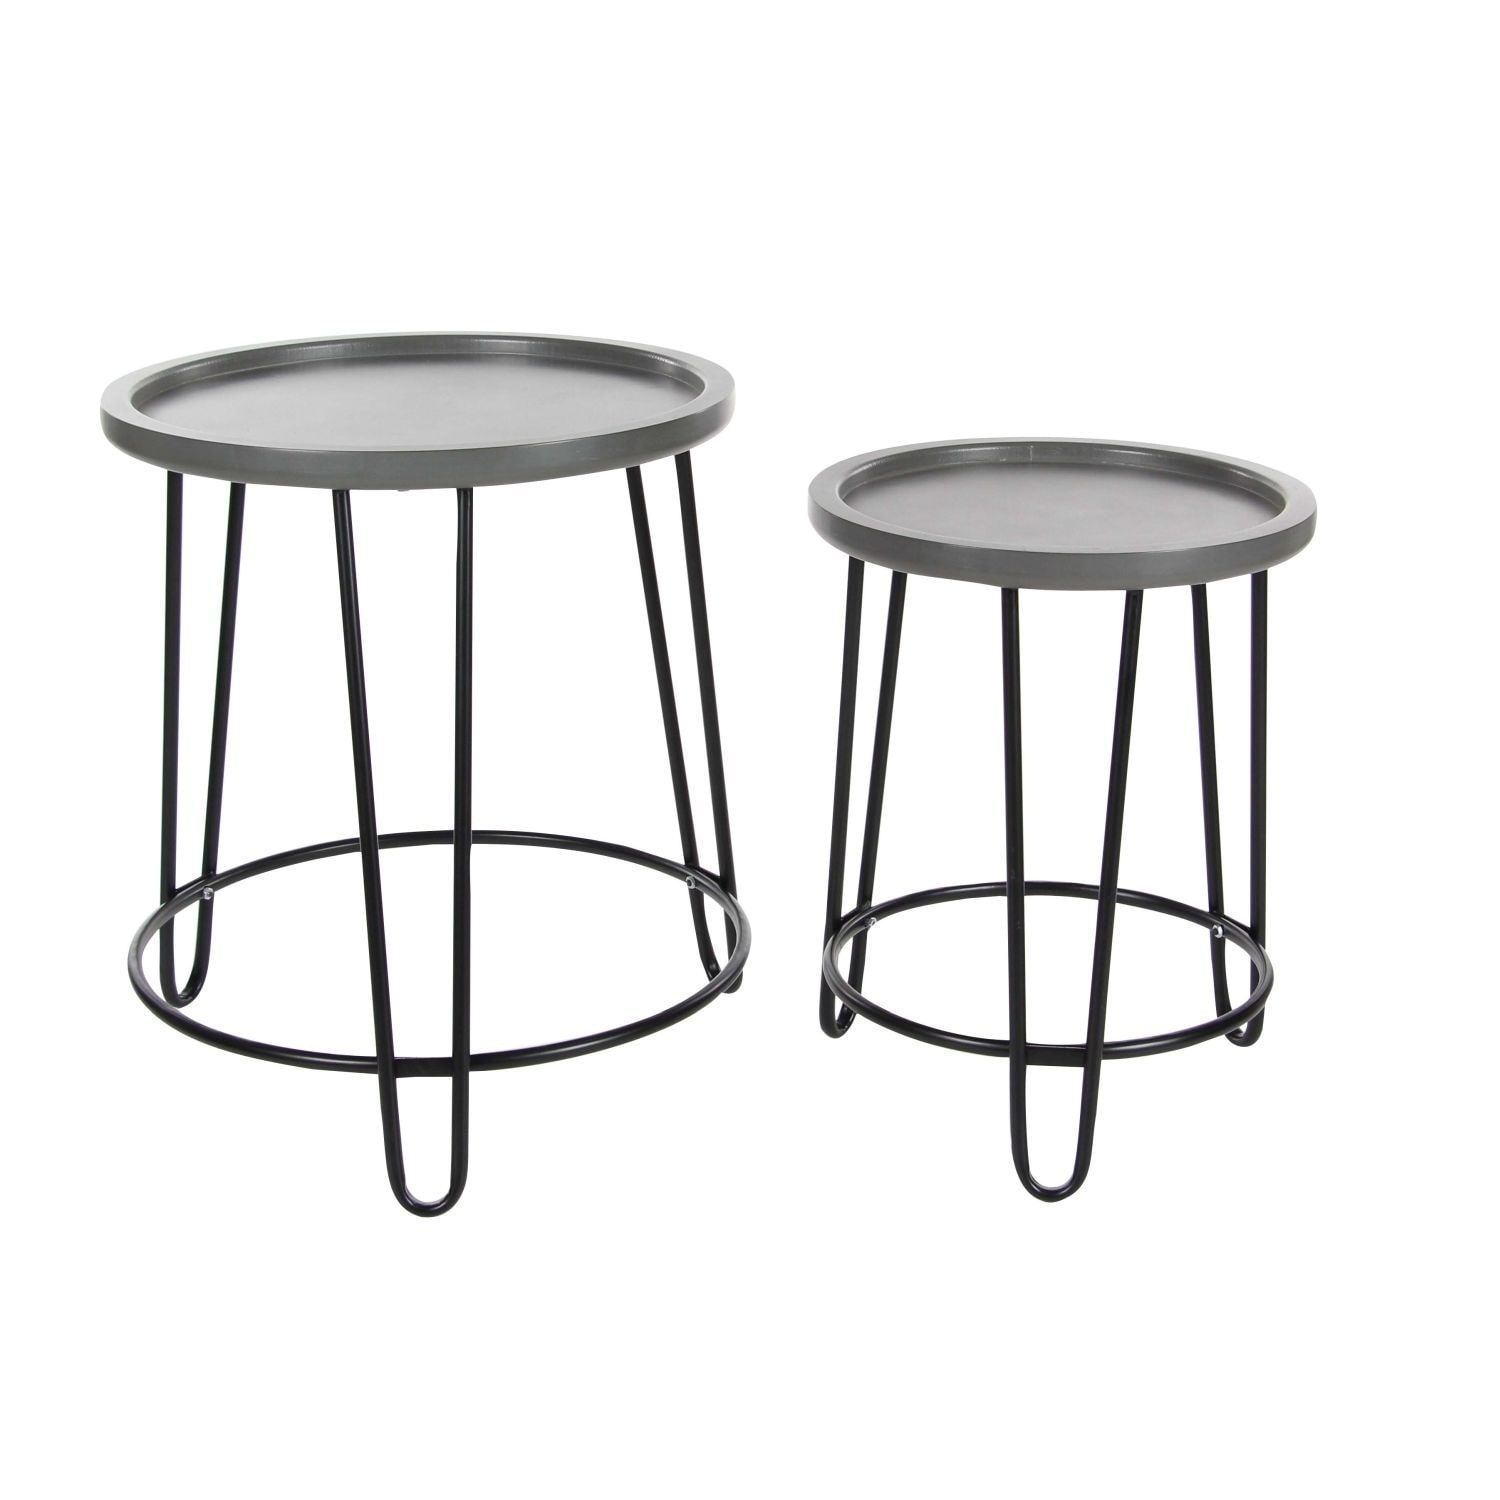 metal round furniture set hei room threshold dining bar white sets base and retro accent table outdoor chairs wrought kitchen patio corranade garden chair top bistro glass full